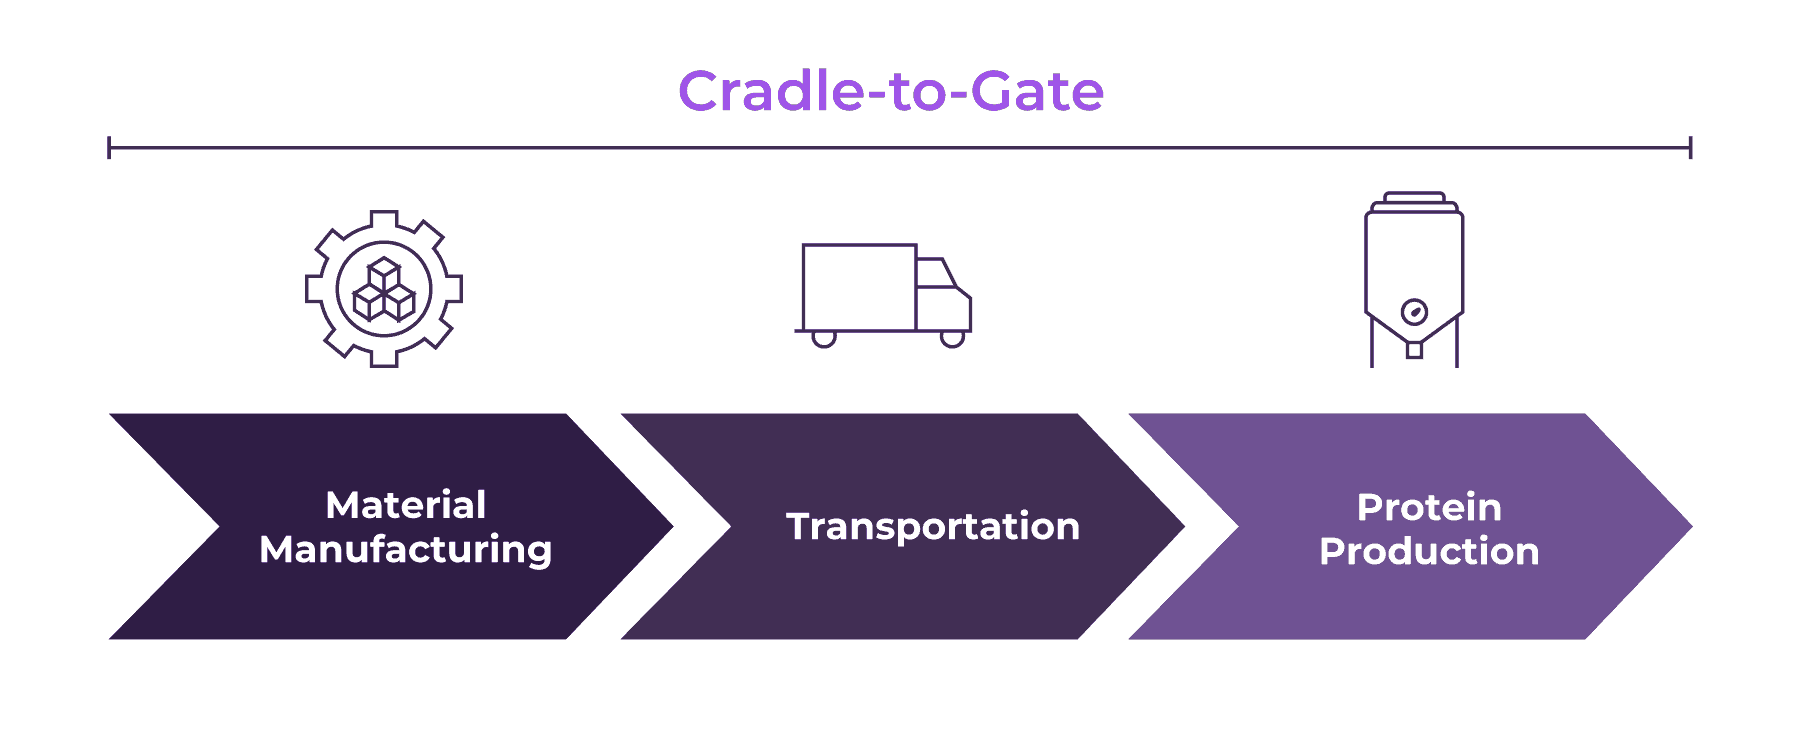 Cradle to Gate includes raw material extraction and manufacturing, transportation, and production methods